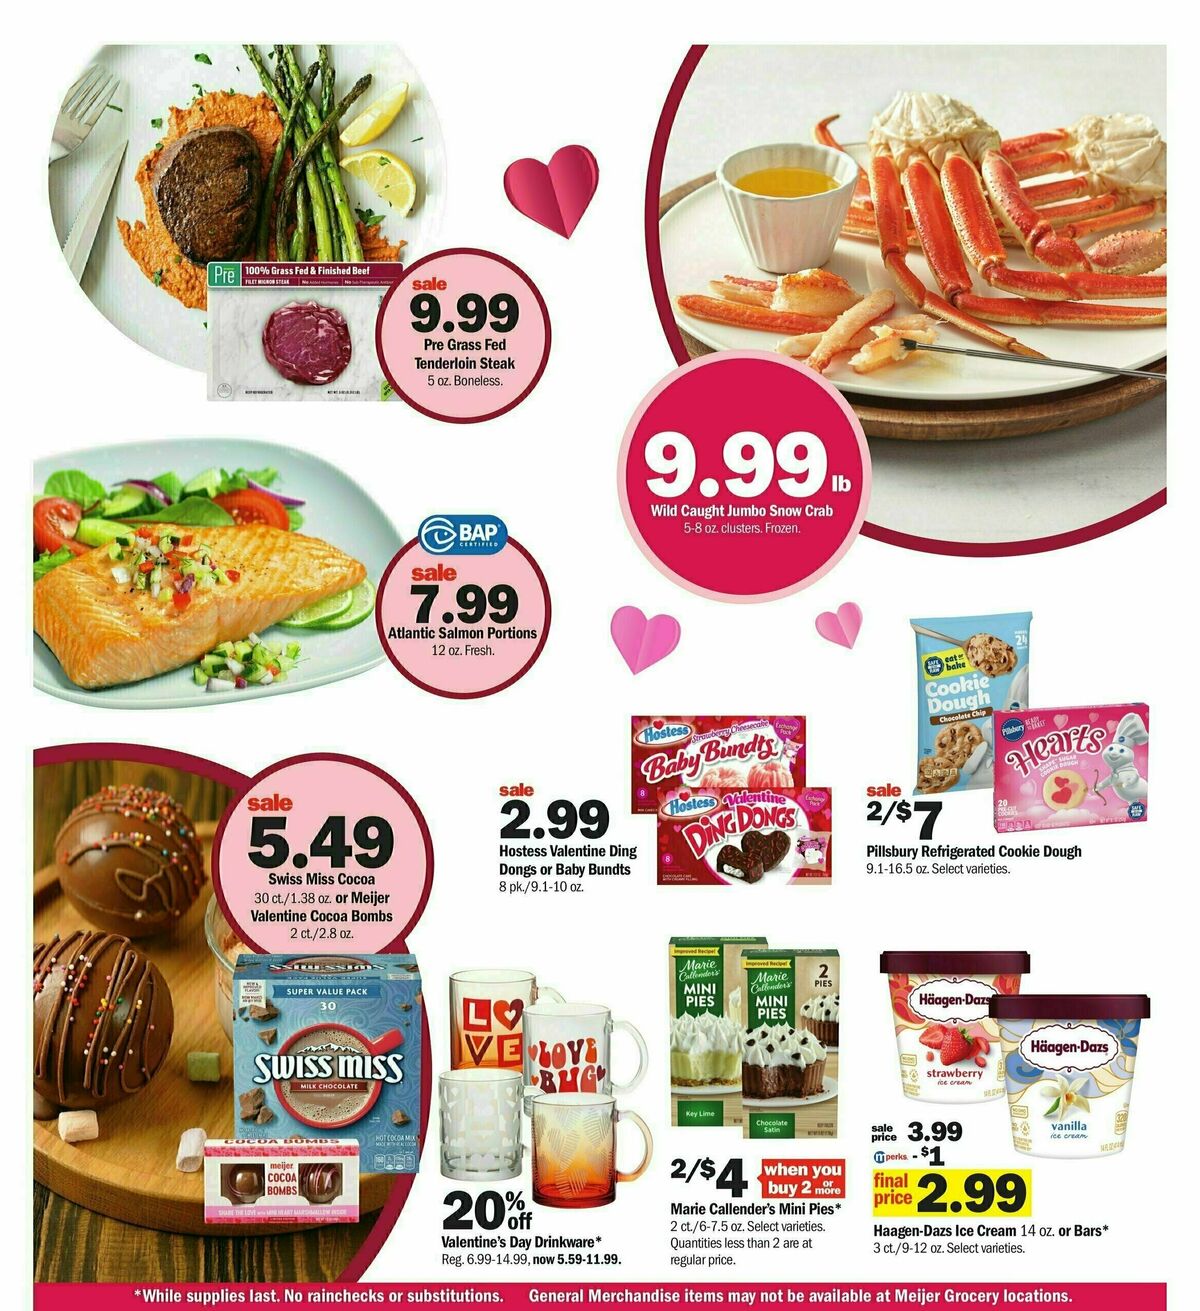 Meijer Valentine's Day Weekly Ad from February 4